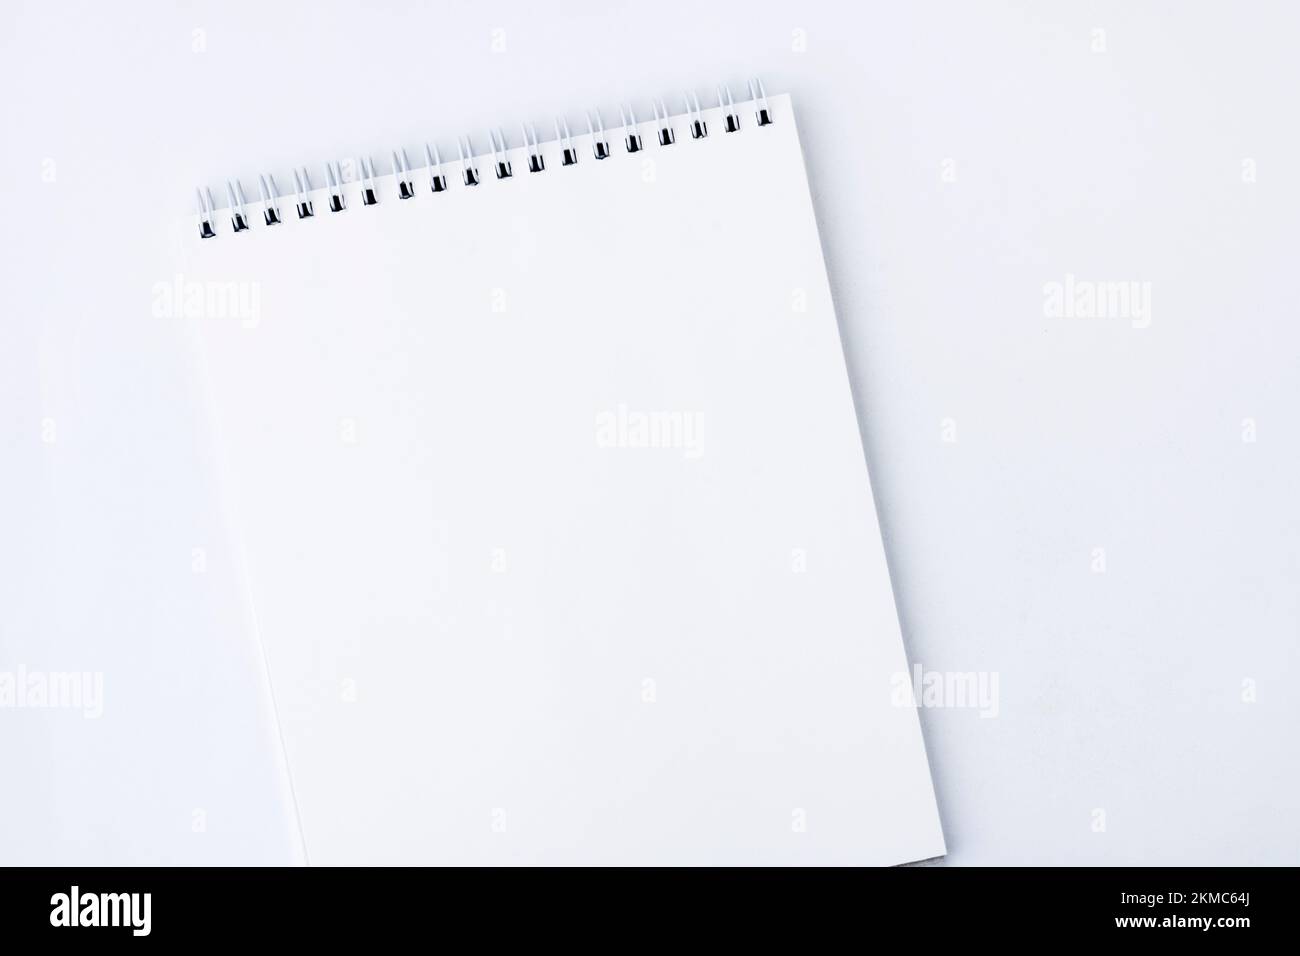 White open notebook. White notebook with spiral mount pages, on a white background. Copy space Stock Photo